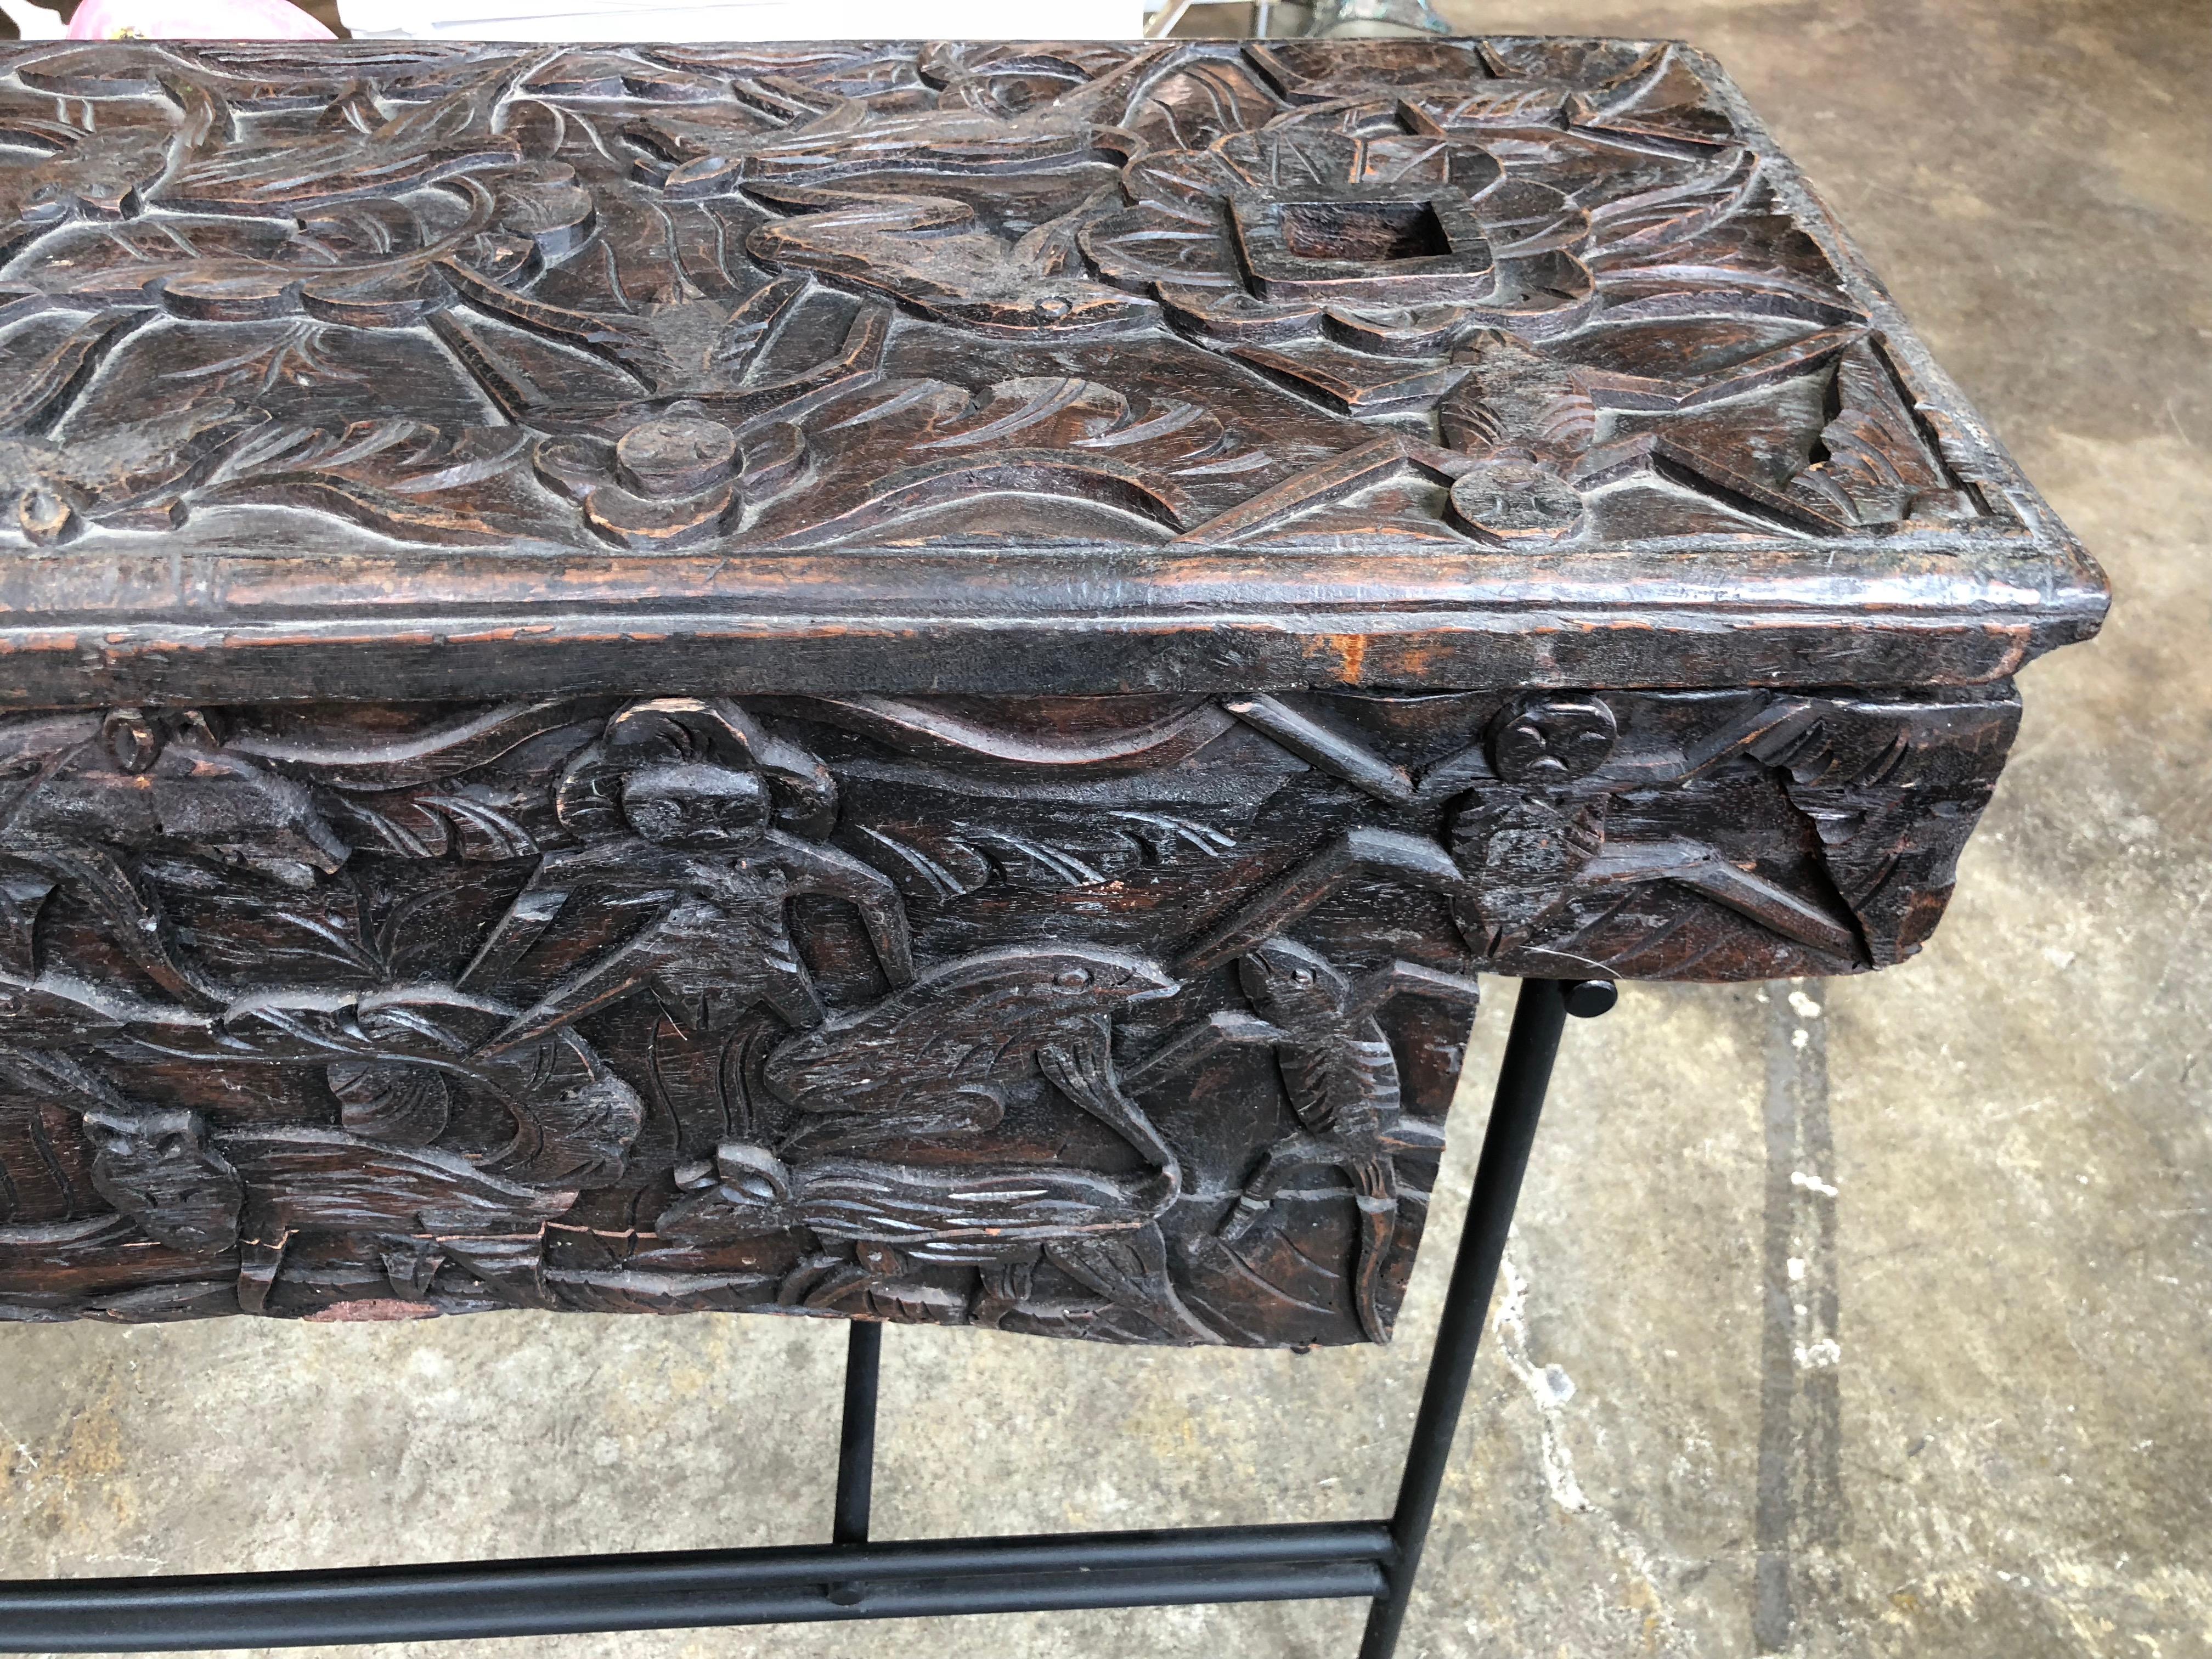 Carved African wood wedding chest on metal custom stand now functioning as a console table or sideboard having a removable top and an overall intricately carved figural animal, fish and human design.